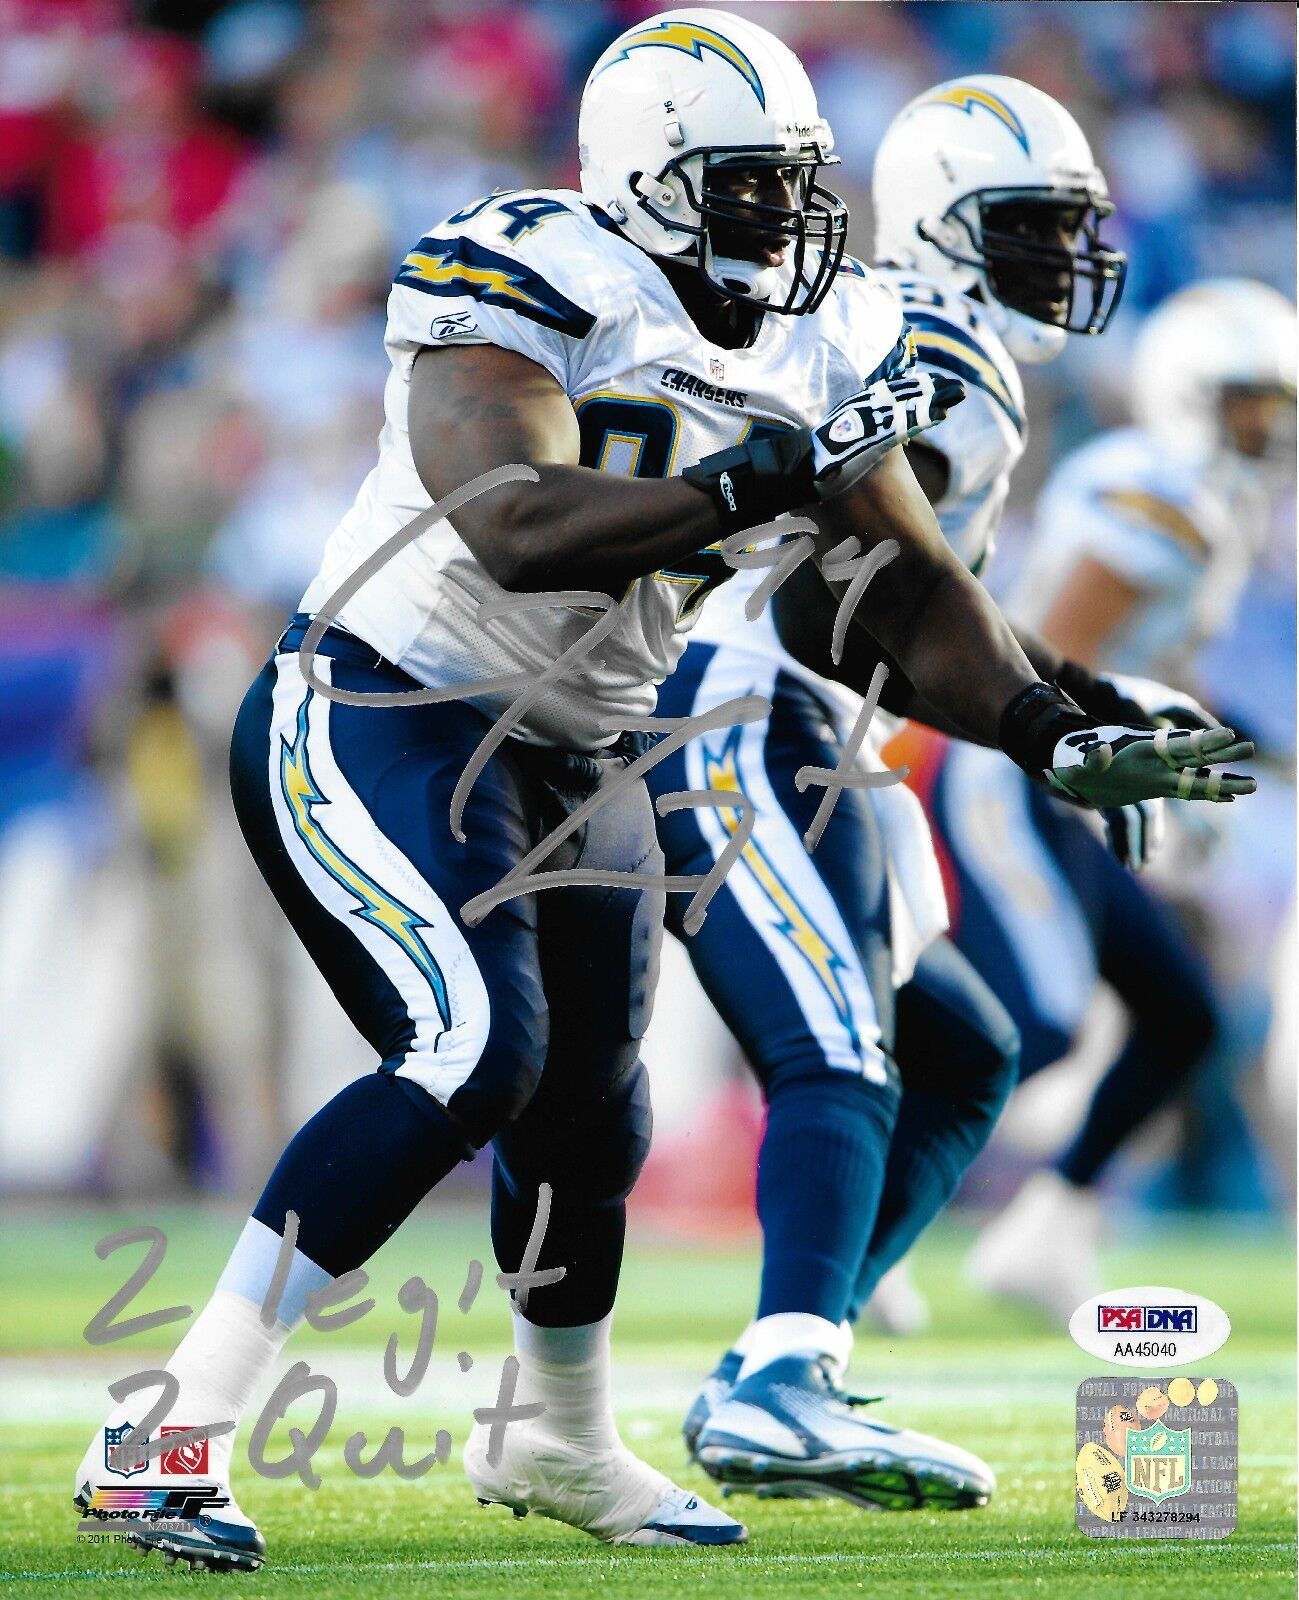 Corey Liuget Signed Chargers Football 8x10 Photo Poster painting PSA/DNA COA Picture Autograph